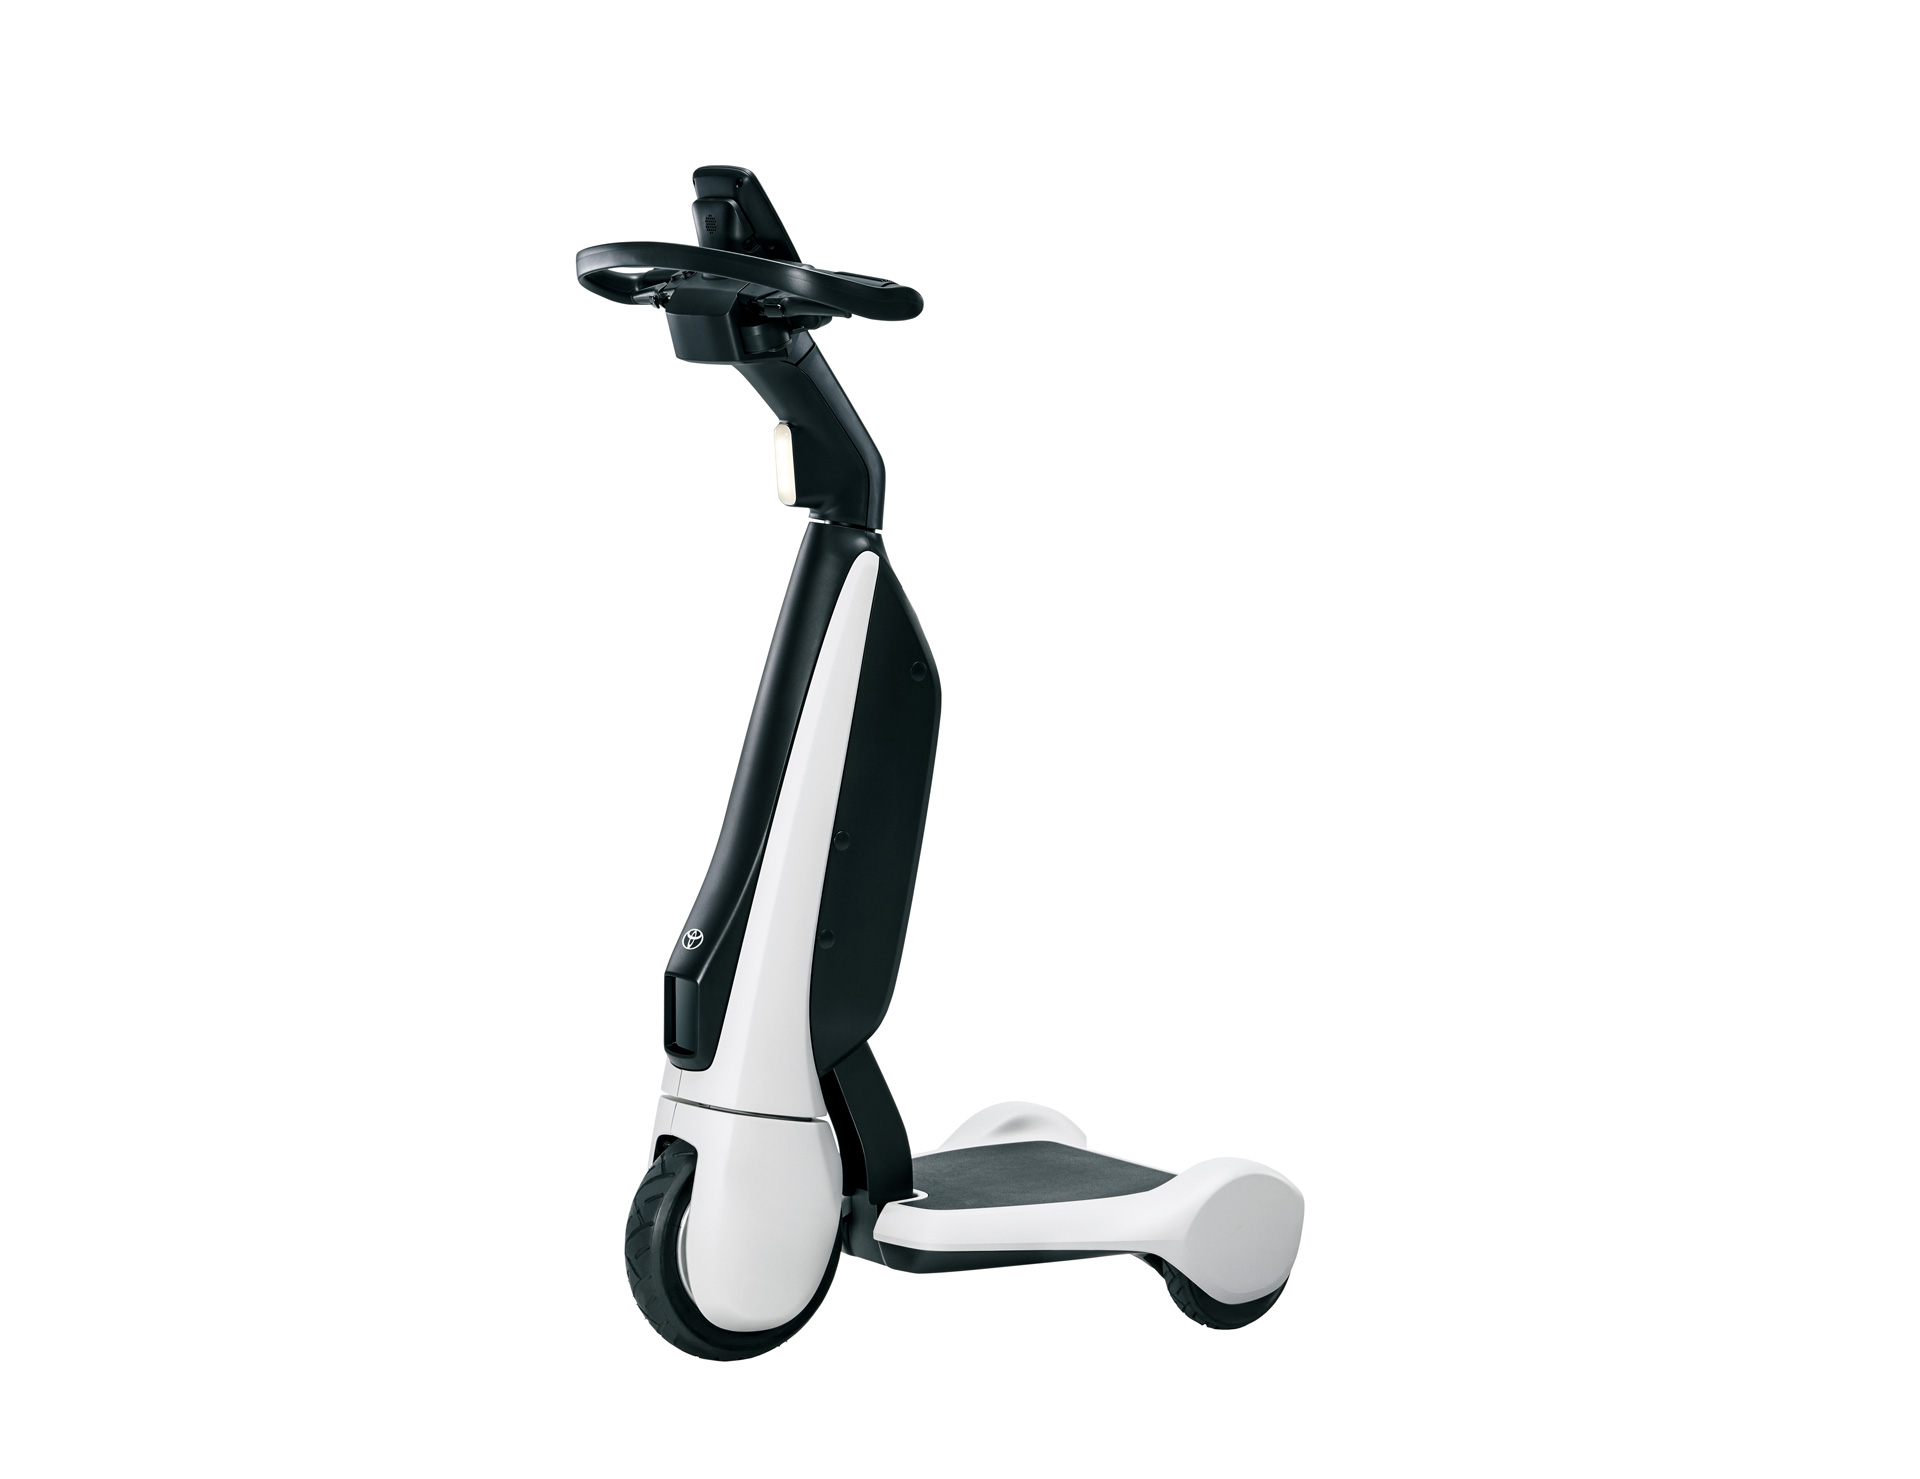 Toyota Launches the C+walk T in Japan, a New Form of Walking-Area 